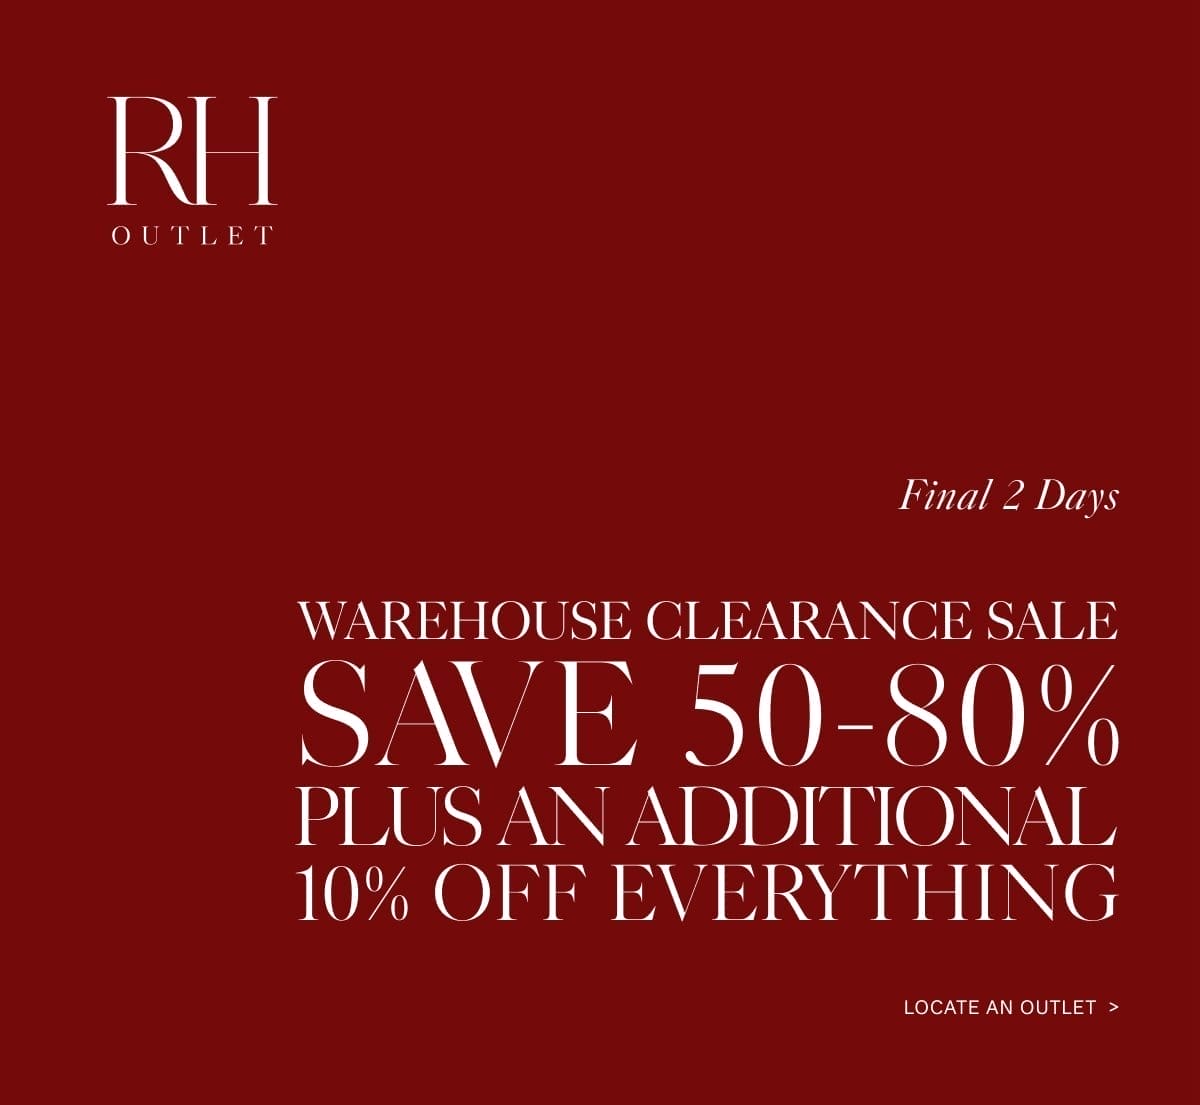 RH Outlet. Spring Clearance Event. Save 50-80% on Everything. Locate an Outlet.